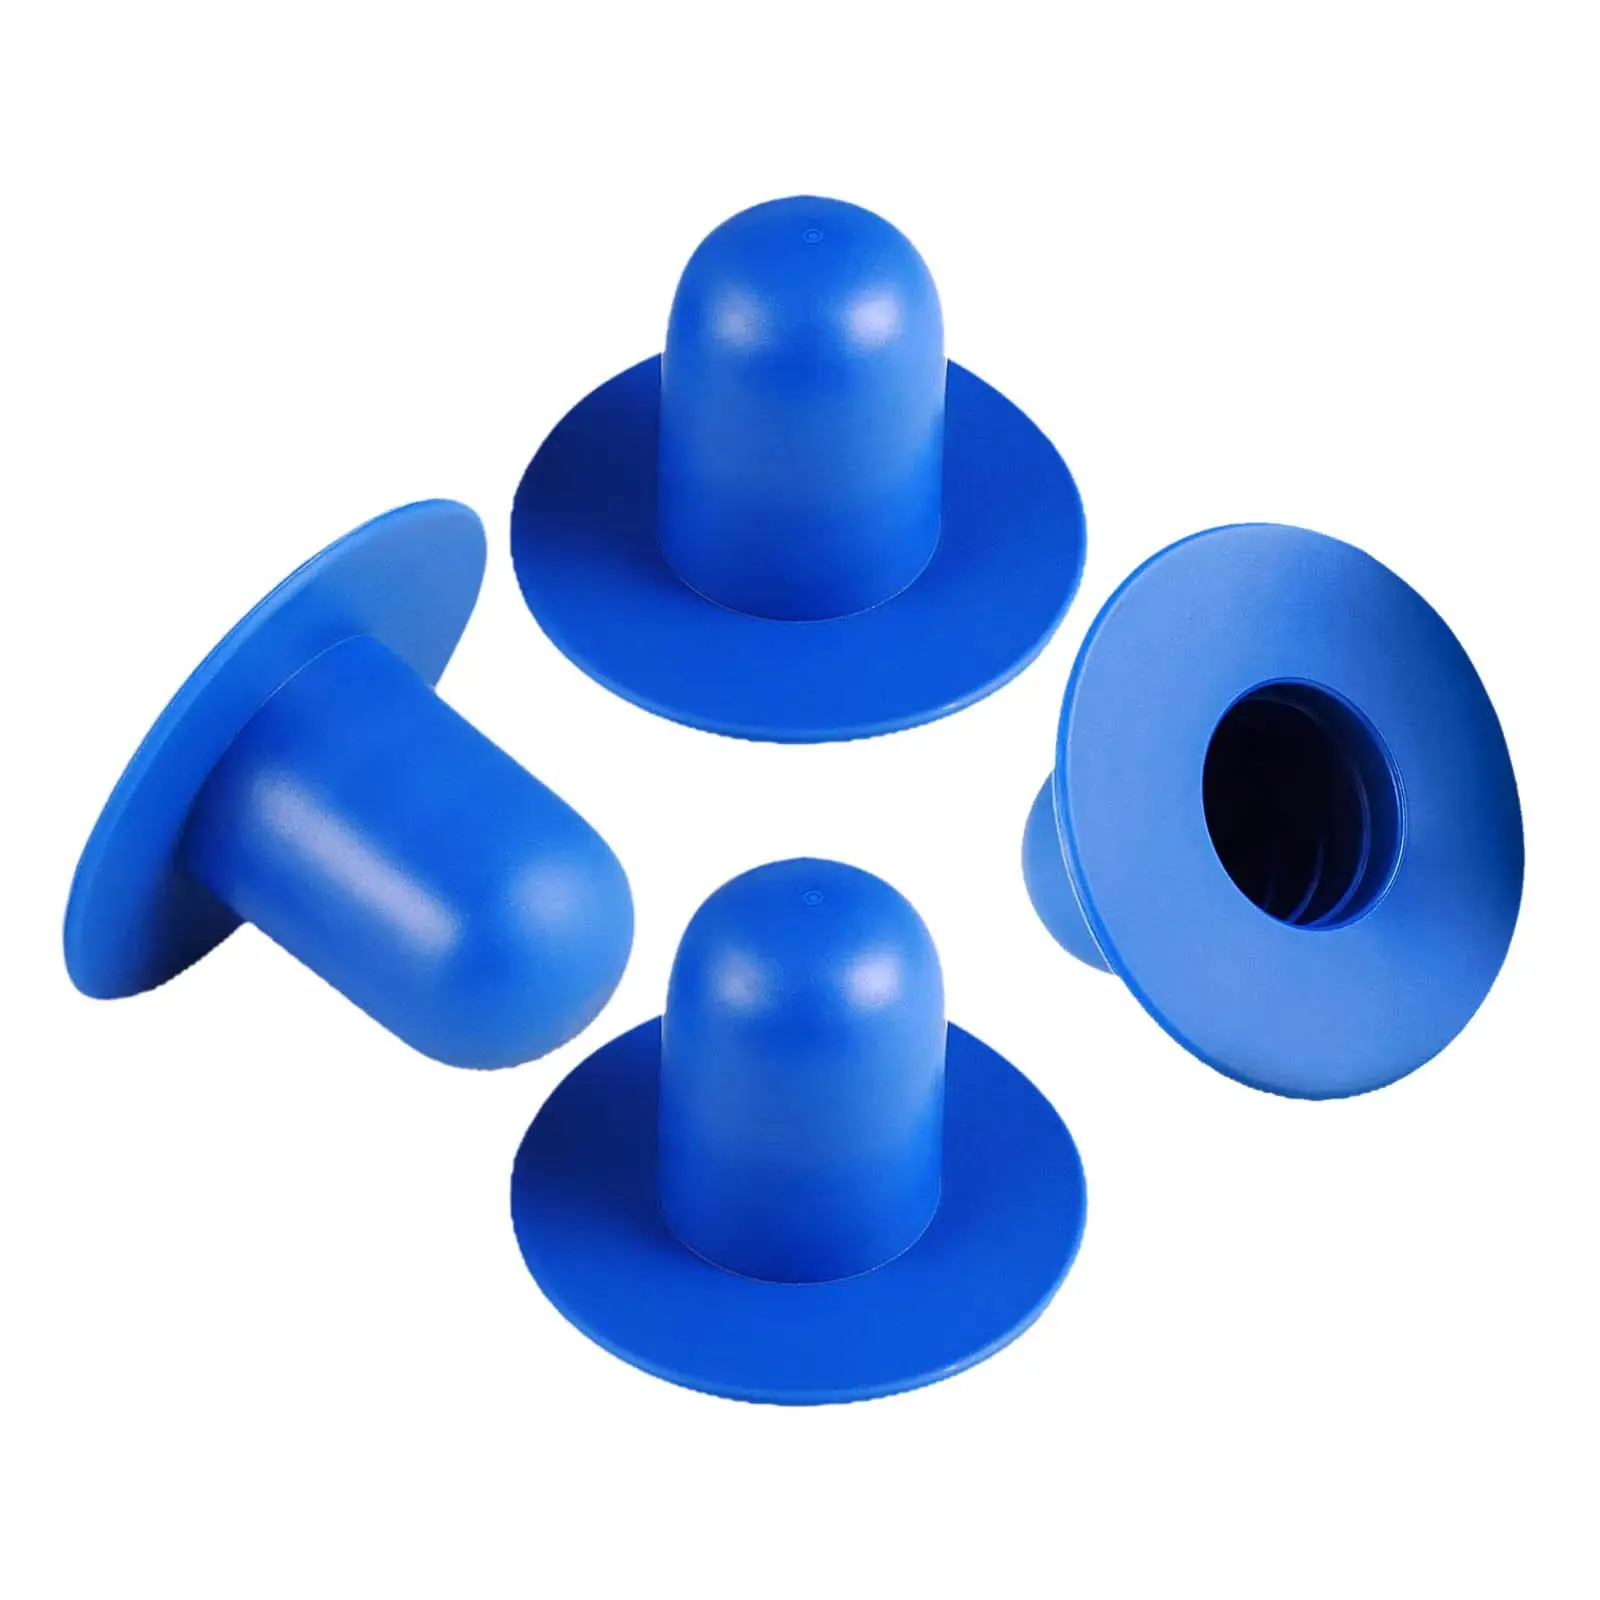 4x above Ground Swimming Pool Plugs Accessories Filter Pump Stopper Strainer Hole Plug PVC for Intex Wall Plug